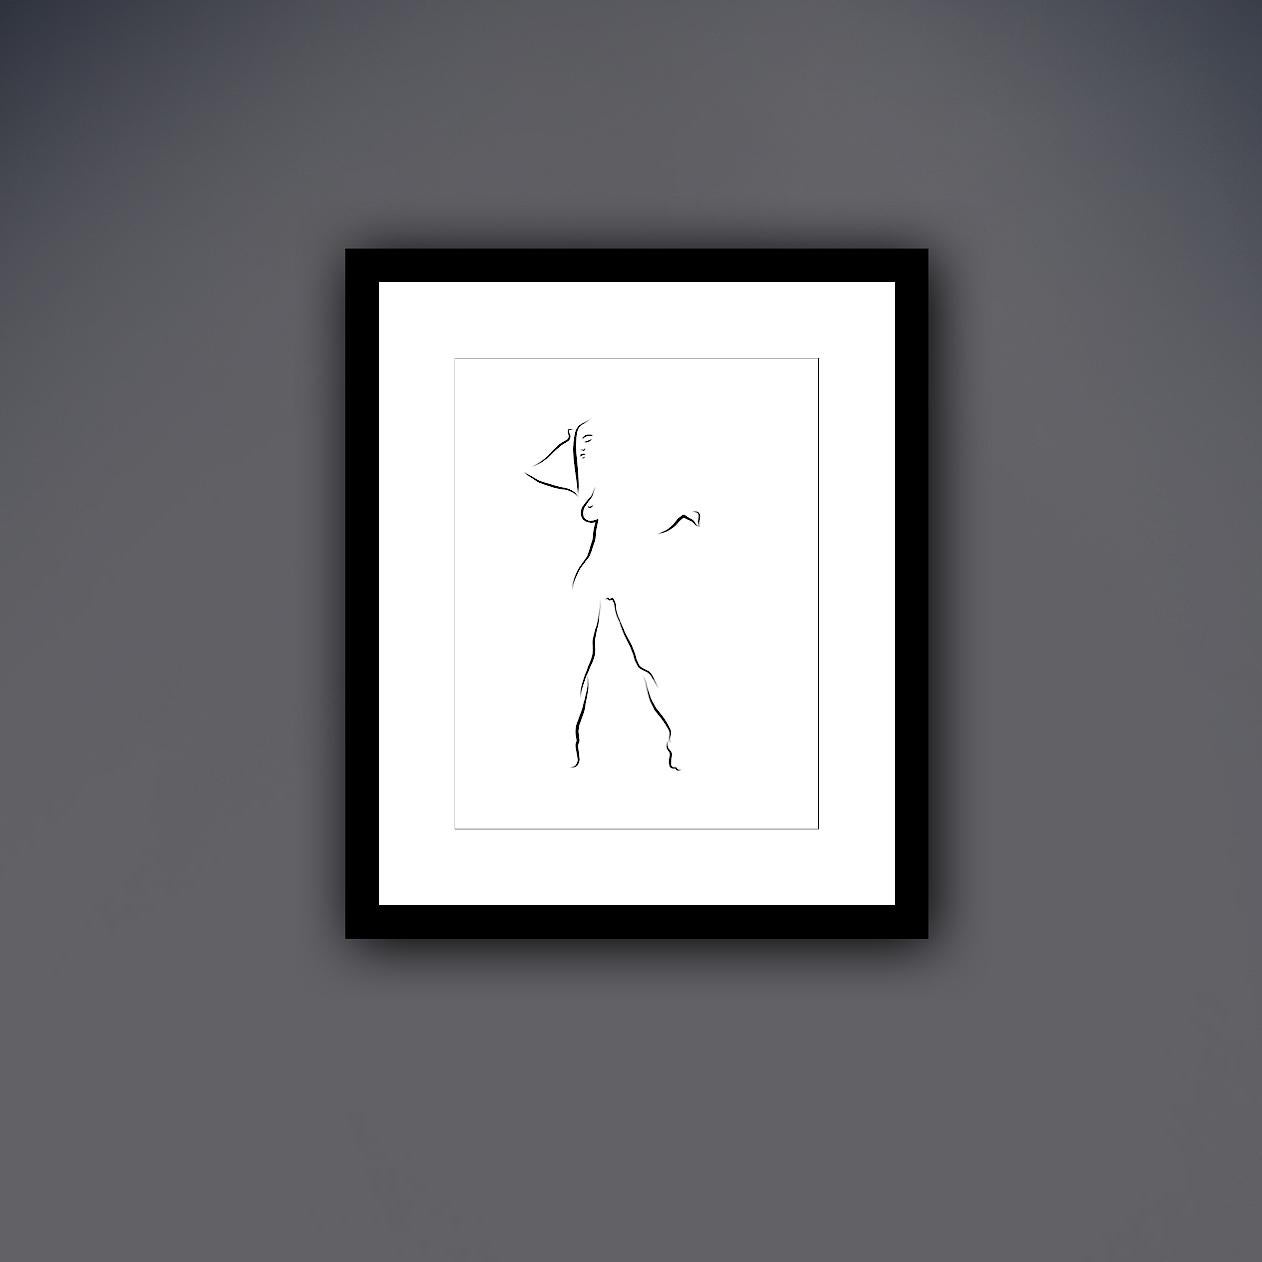 Haiku #50 - Digital Vector Drawing Standing Female Nude Woman Figure

This is a limited edition (50) digital black & white print of a standing female nude, executed in 17 vector lines. It is part of a series called Haiku, after the style of Japanese